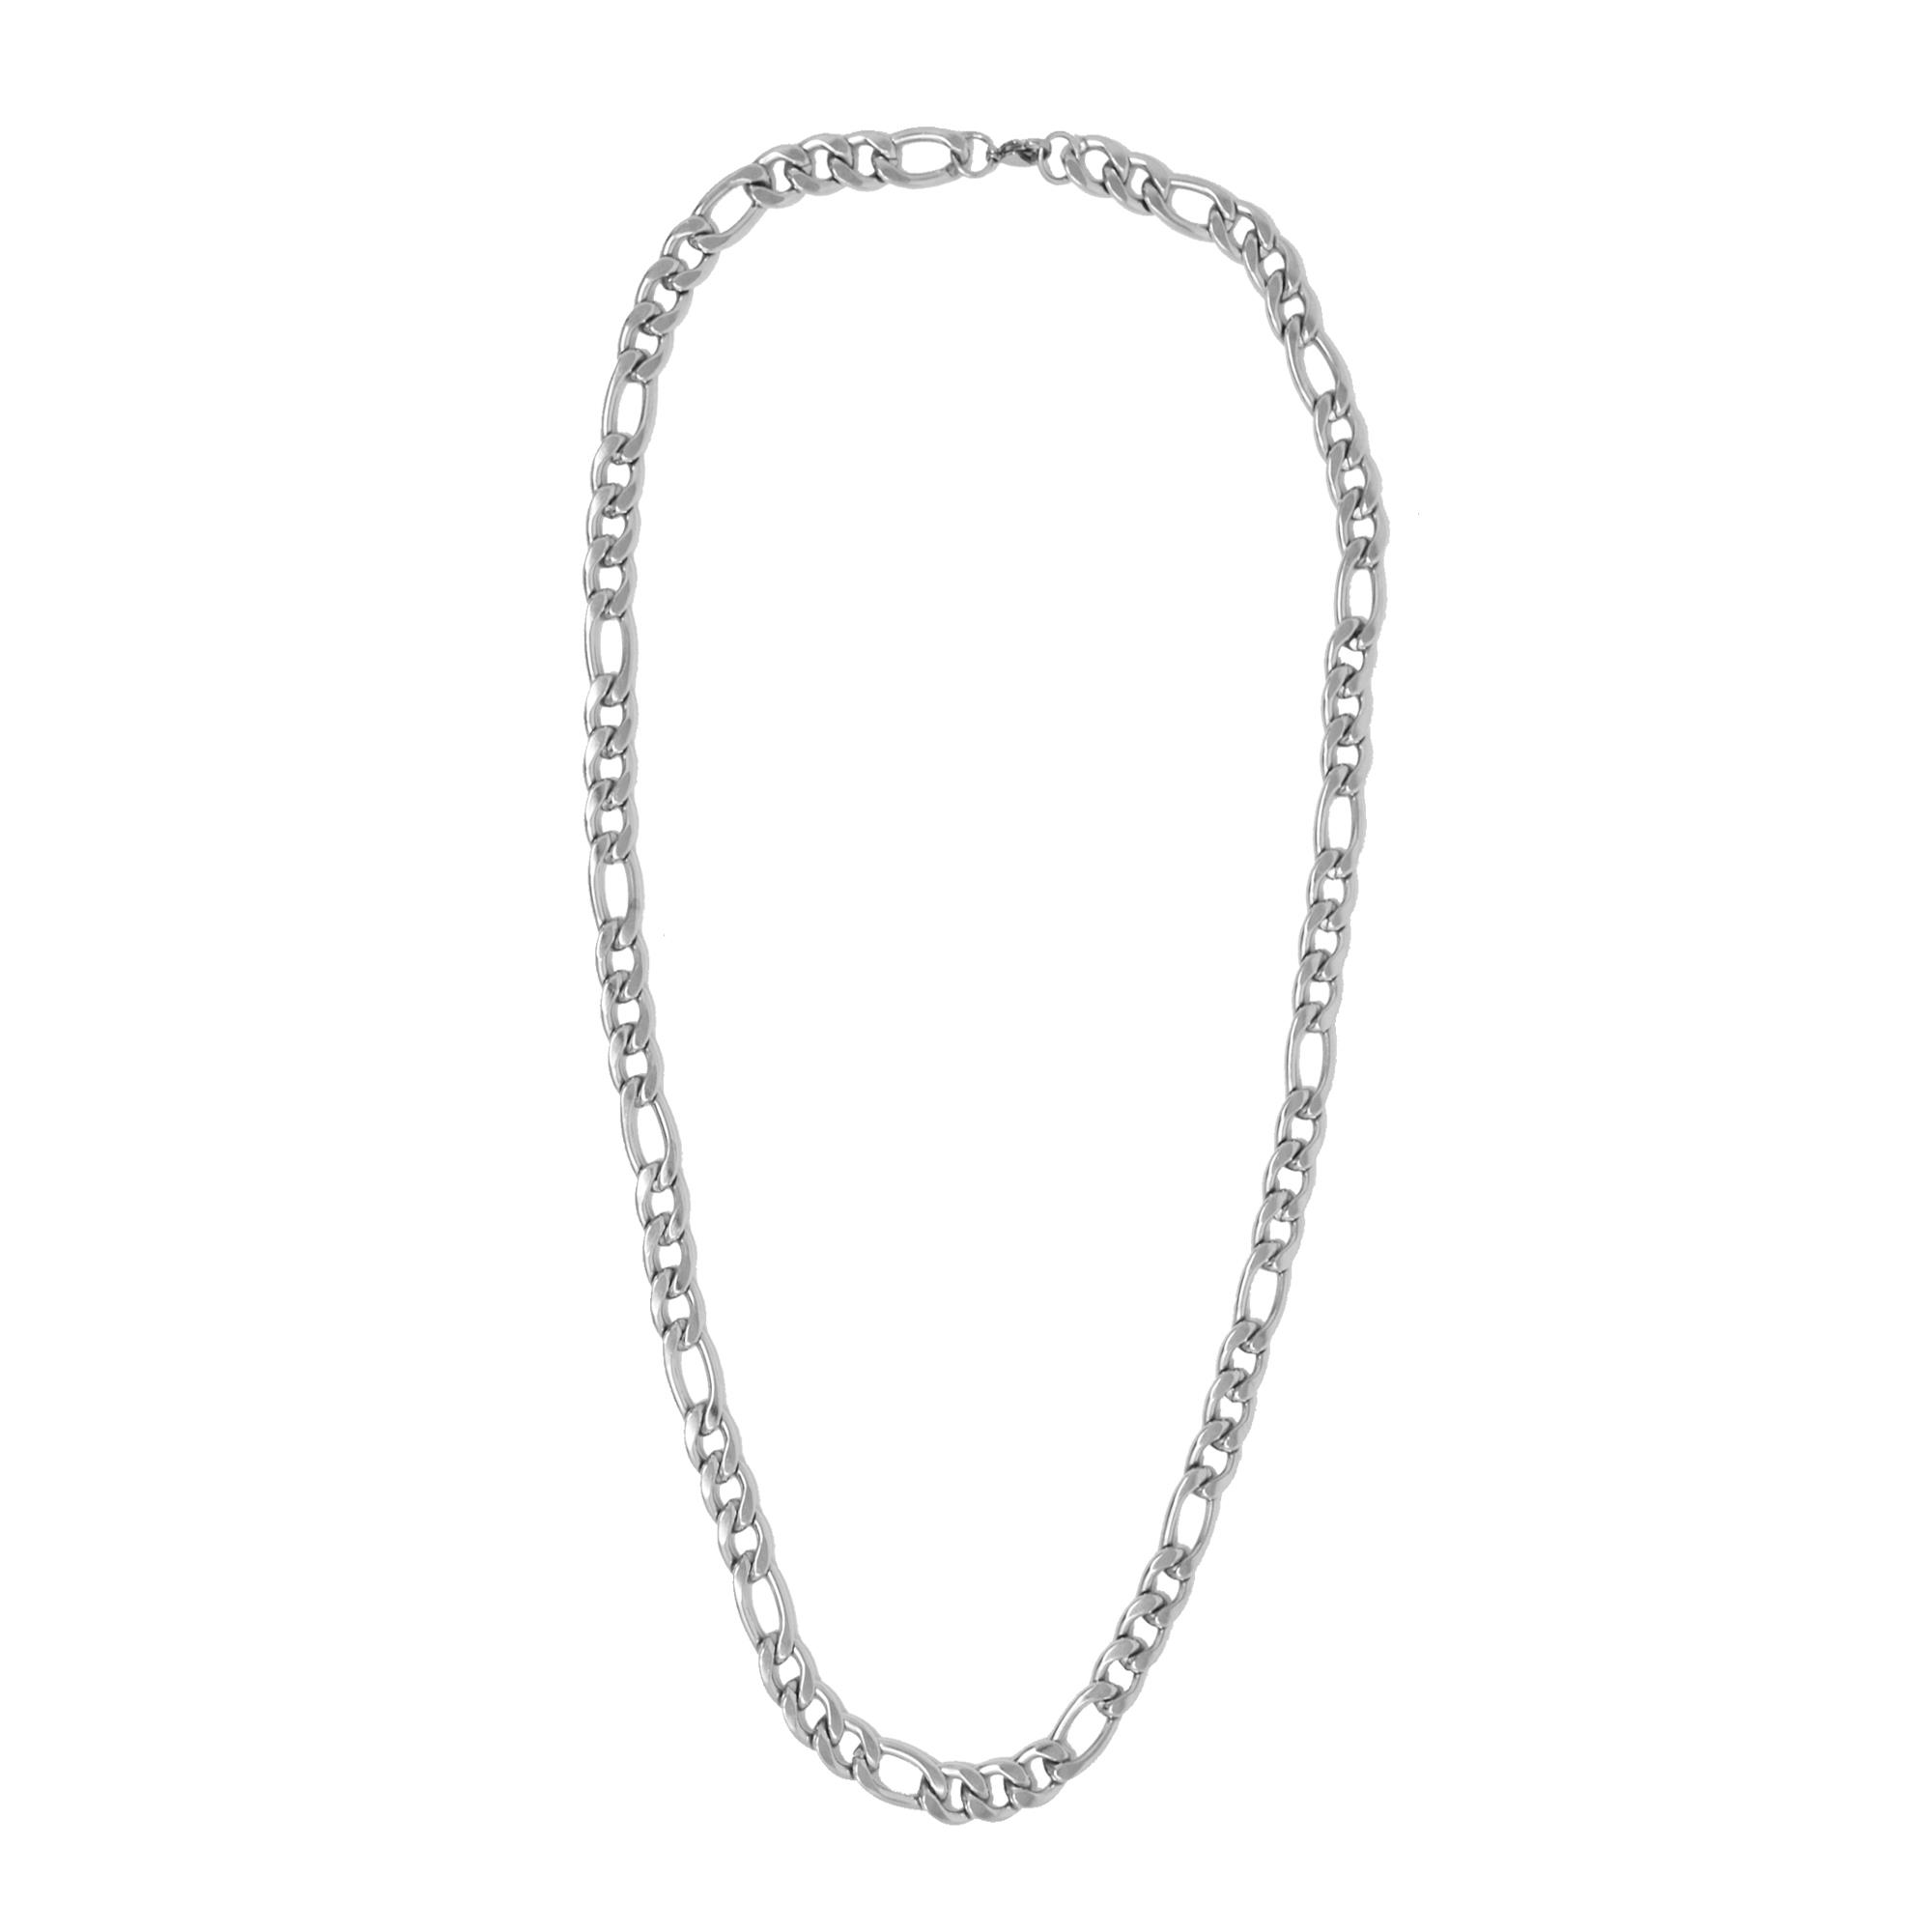 S STEEL NK 22IN/55CM FLAT CHAIN LINK NECKLACE